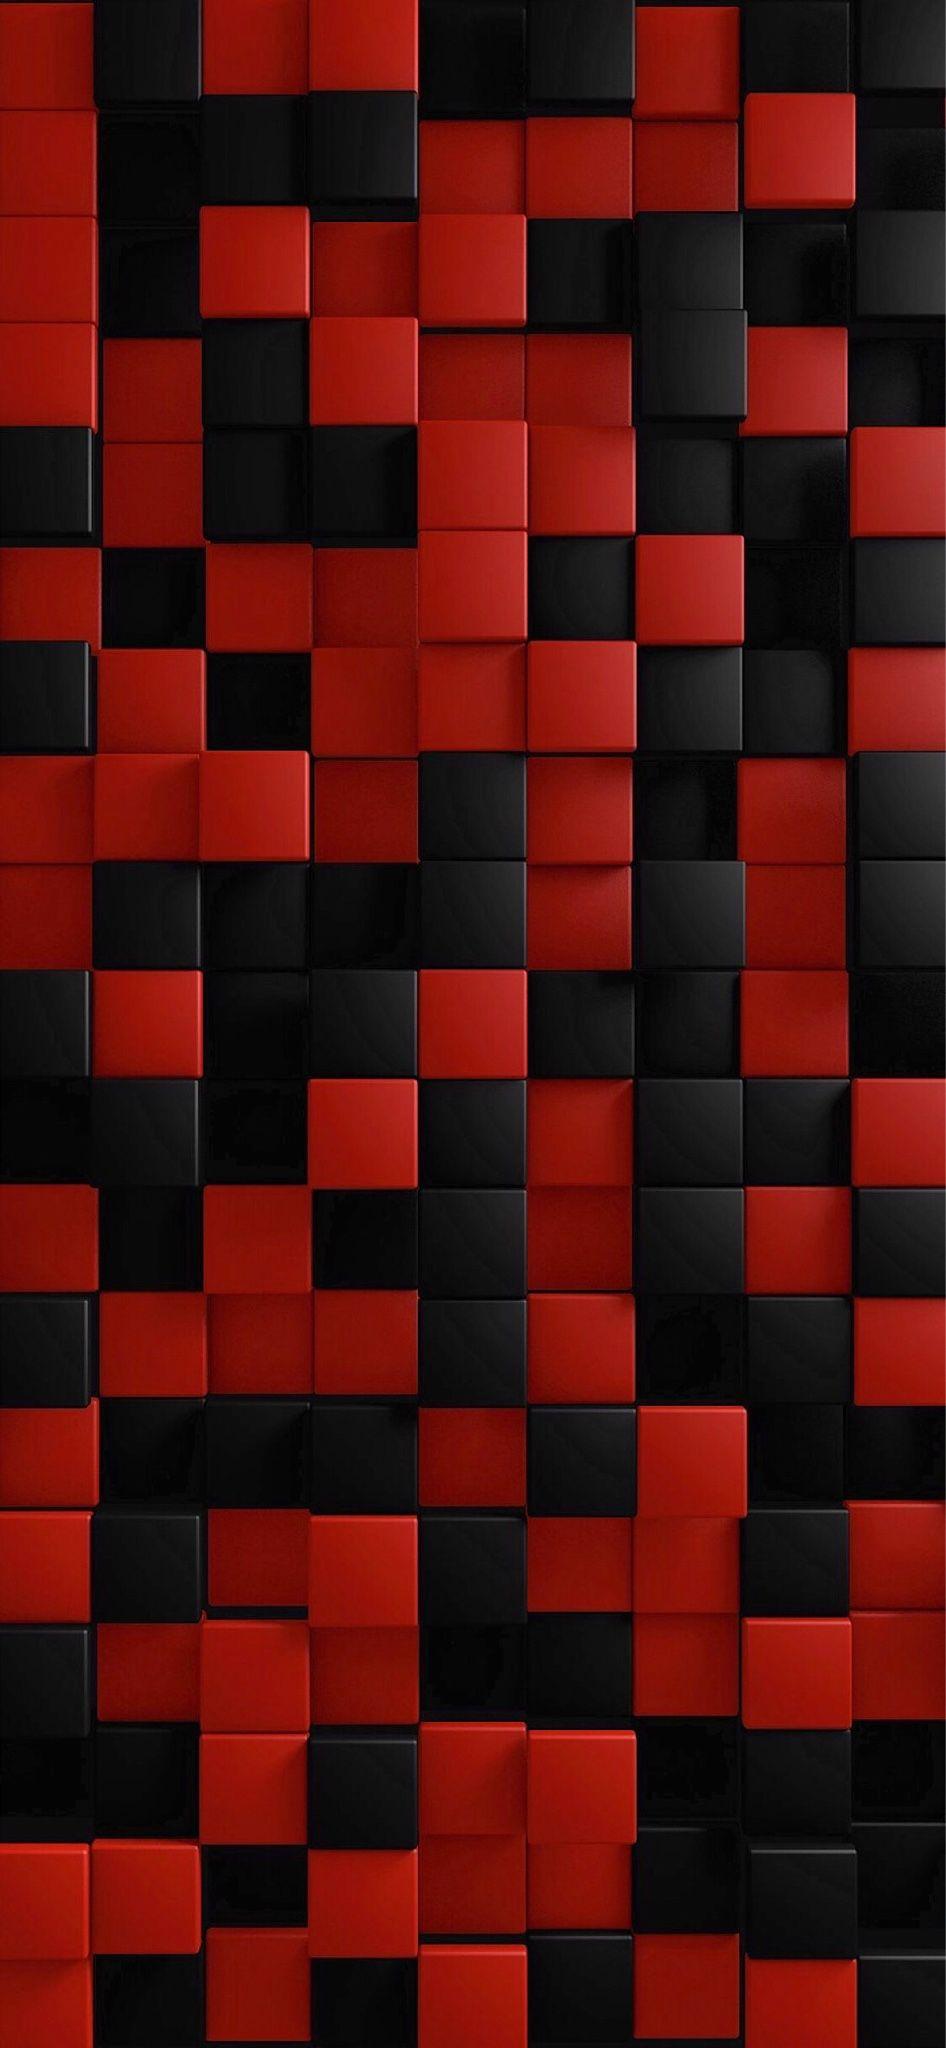 Red And Black Cube HD Wallpaper For Mobile, iPhone De